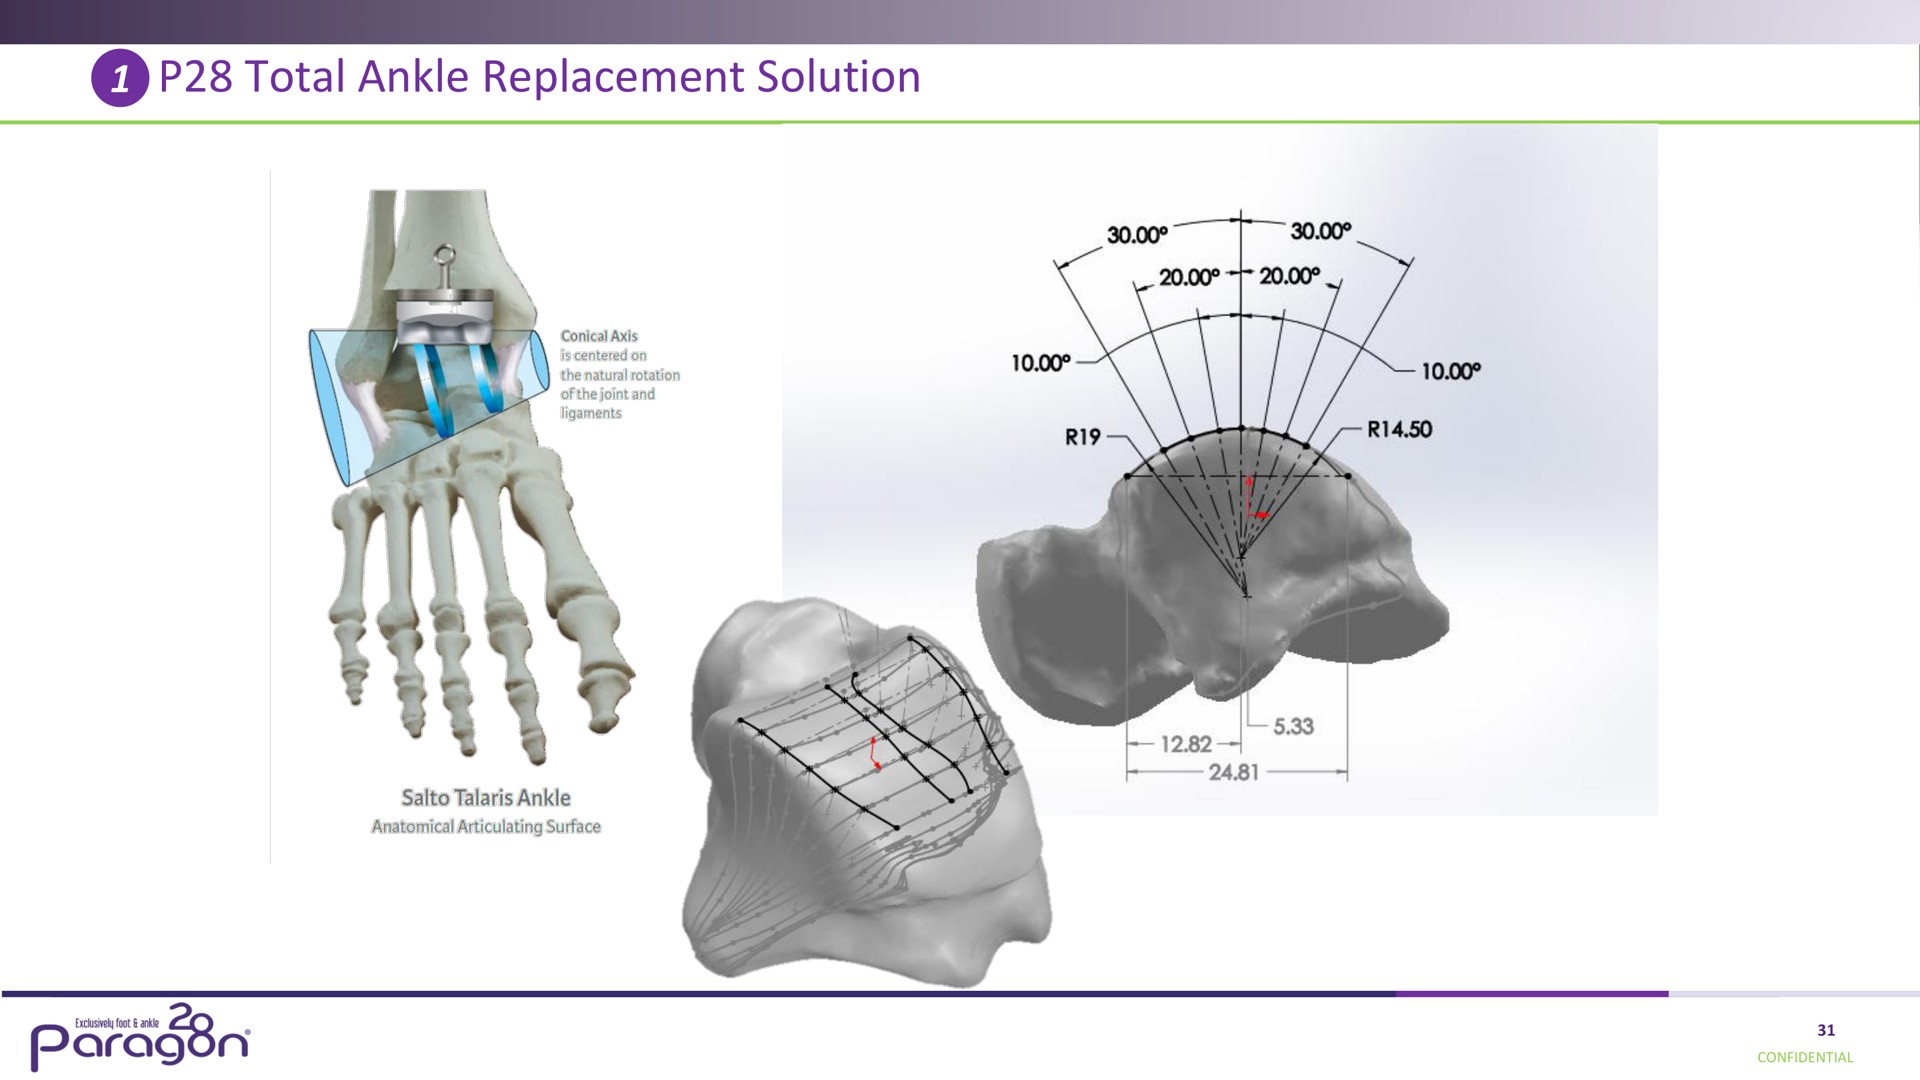 total ankle replacement solution a paragon | Paragon28